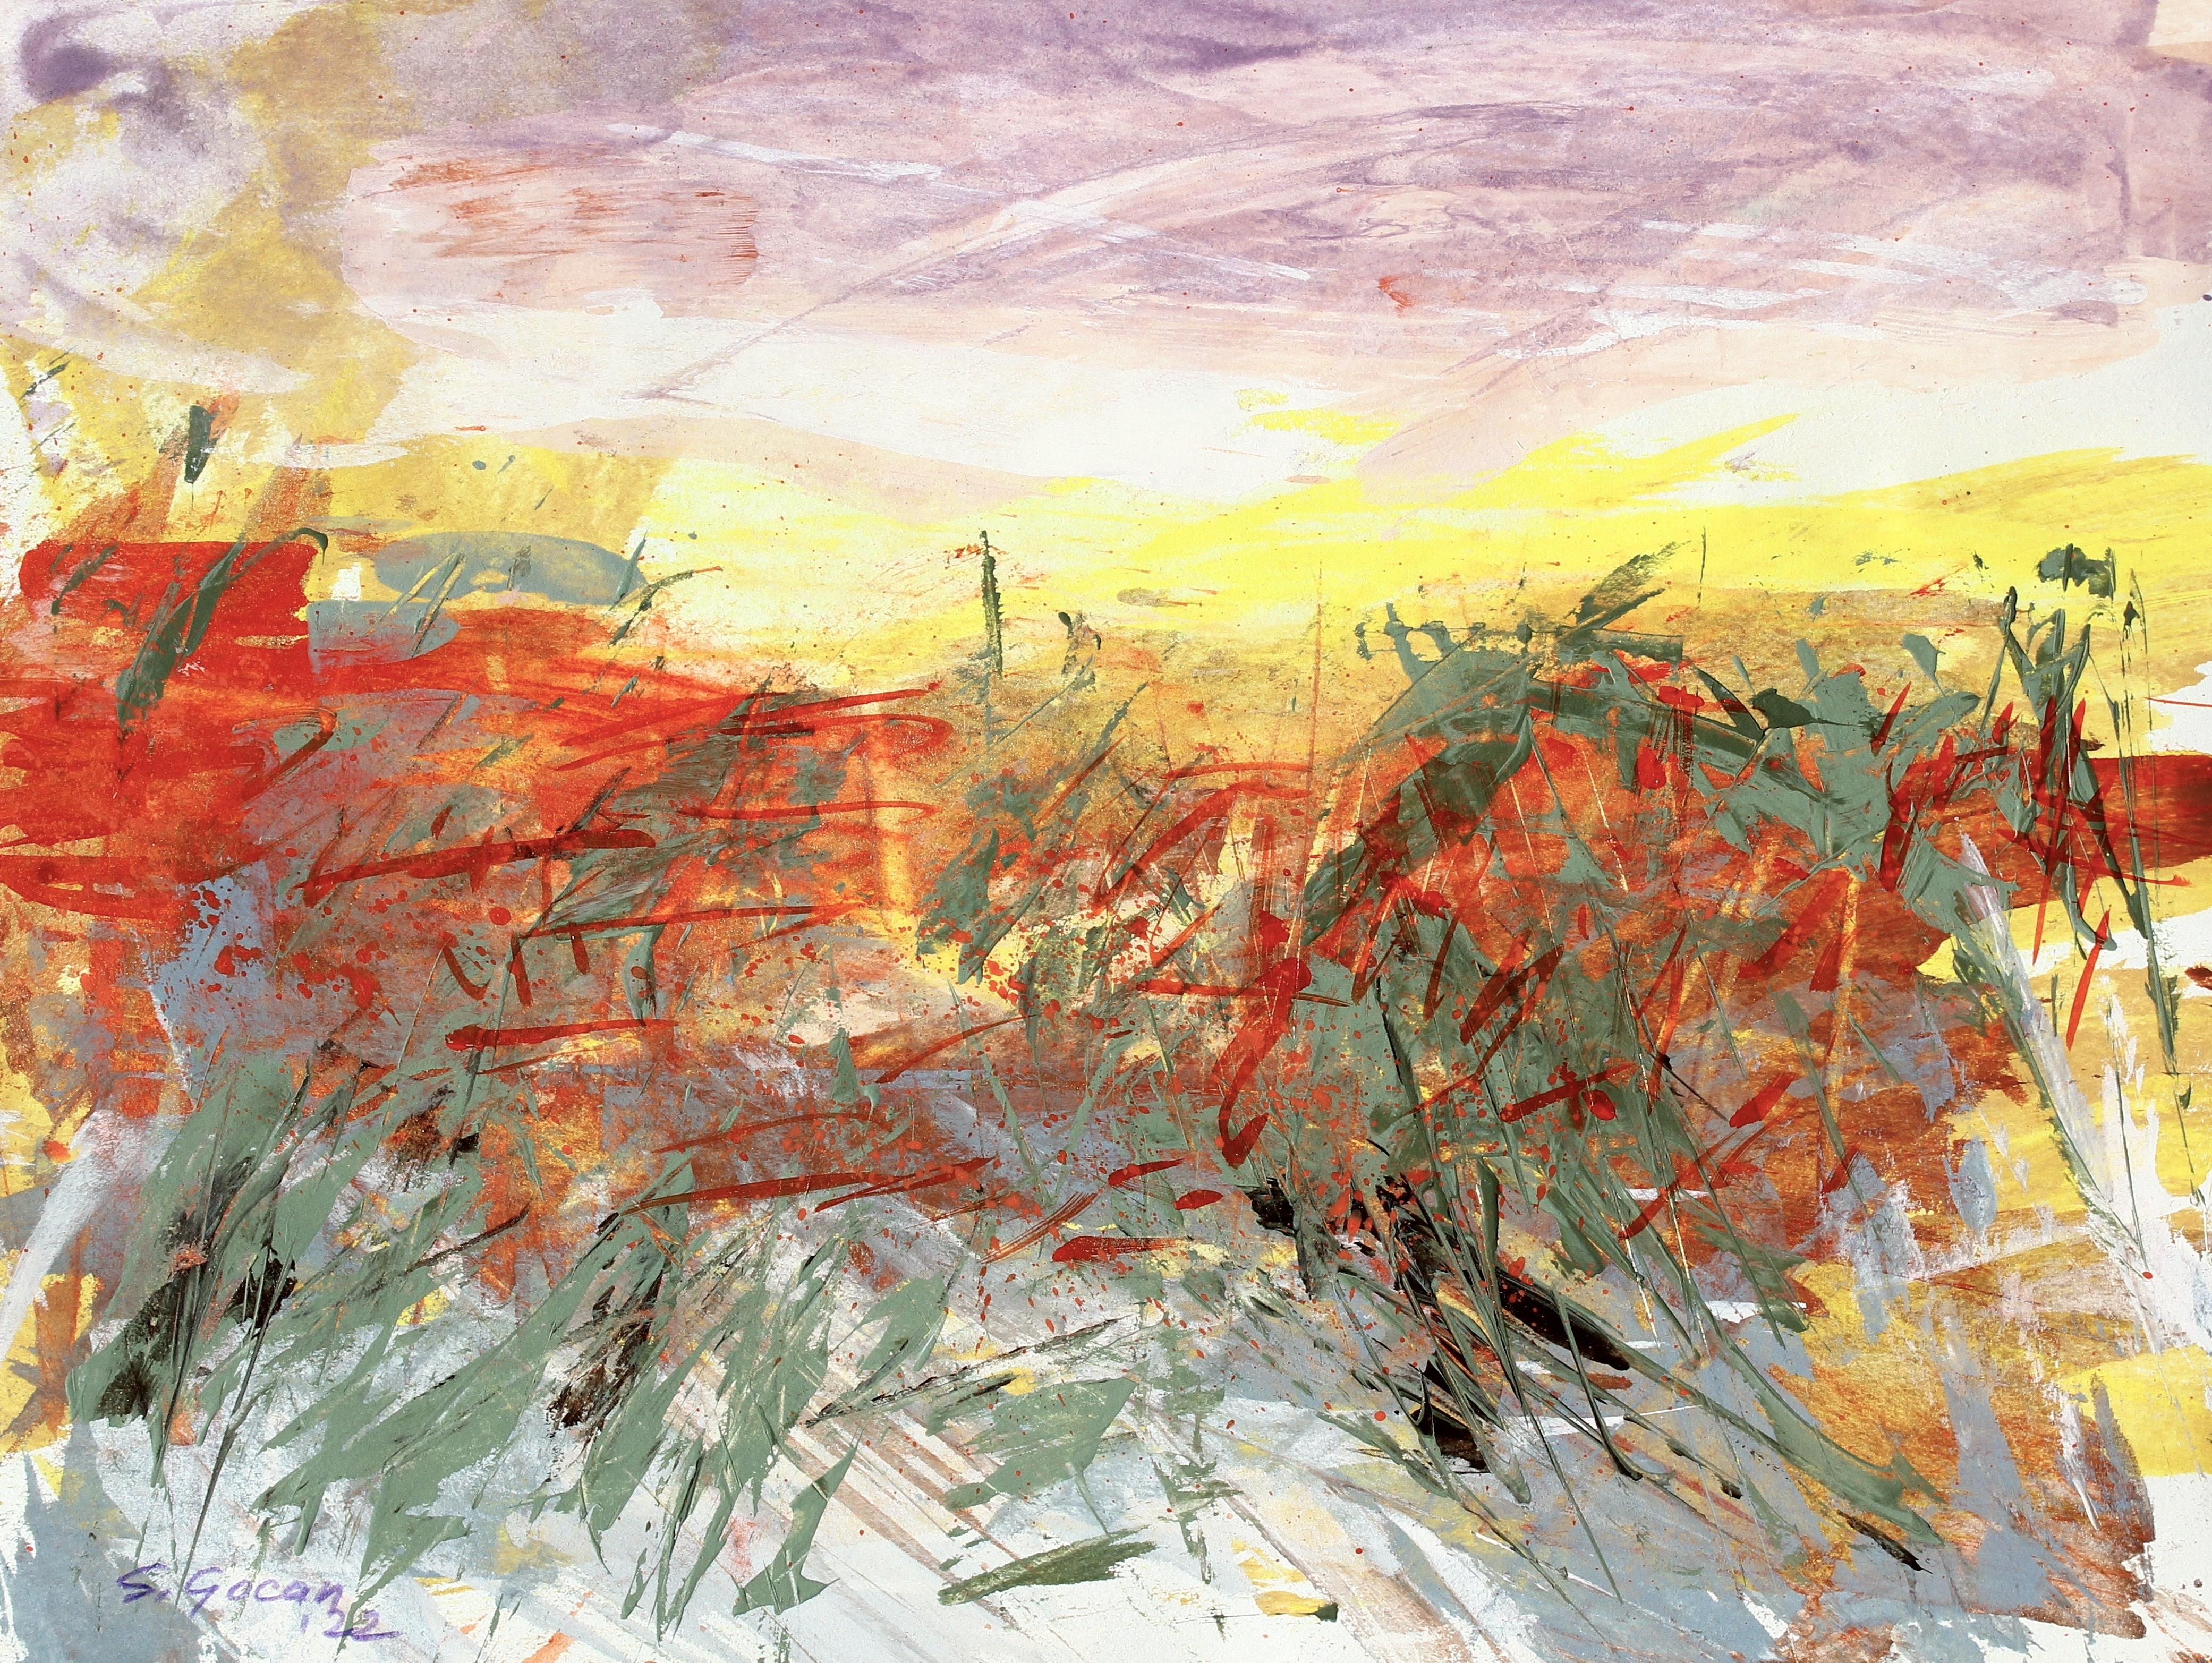 Desertscape #4, Signed Contemporary Abstract Expressionist Landscape Painting